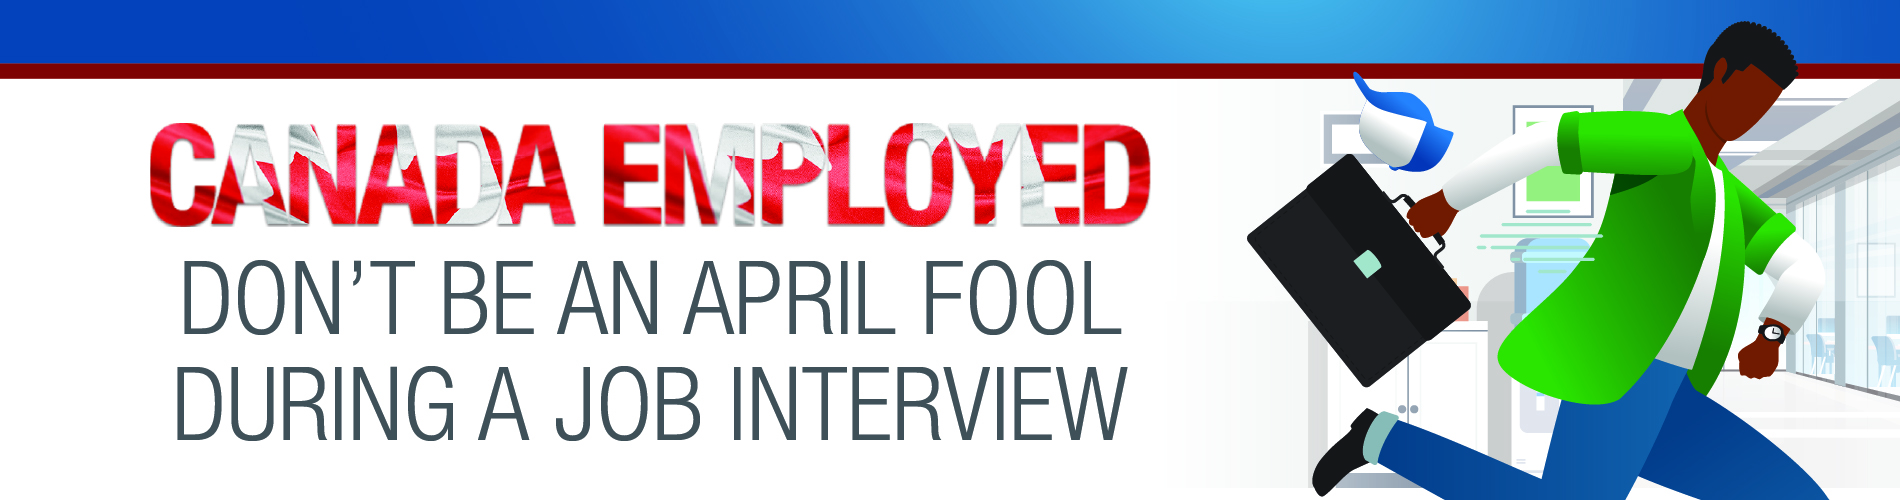 3-27-24 Flunking Your Job Interview - Canada Employed